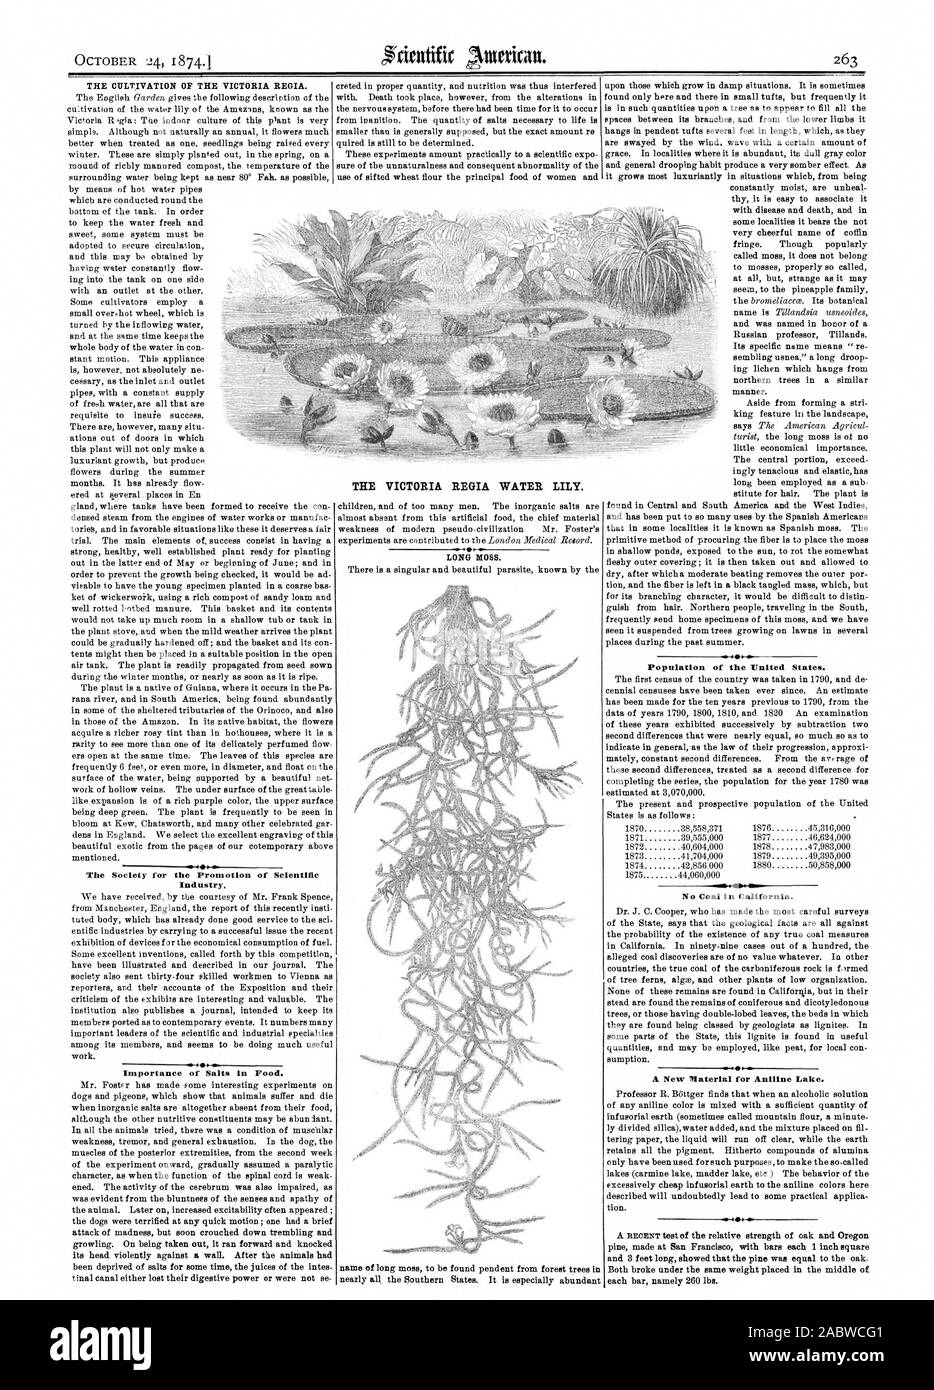 The Society for the Promotion of Scientific Industry. Importance of Salts in Food. No Coal in California. A New Material for Aniline Lake. THE VICTORIA REGIA WATER LILY., scientific american, 1874-10-24 Stock Photo